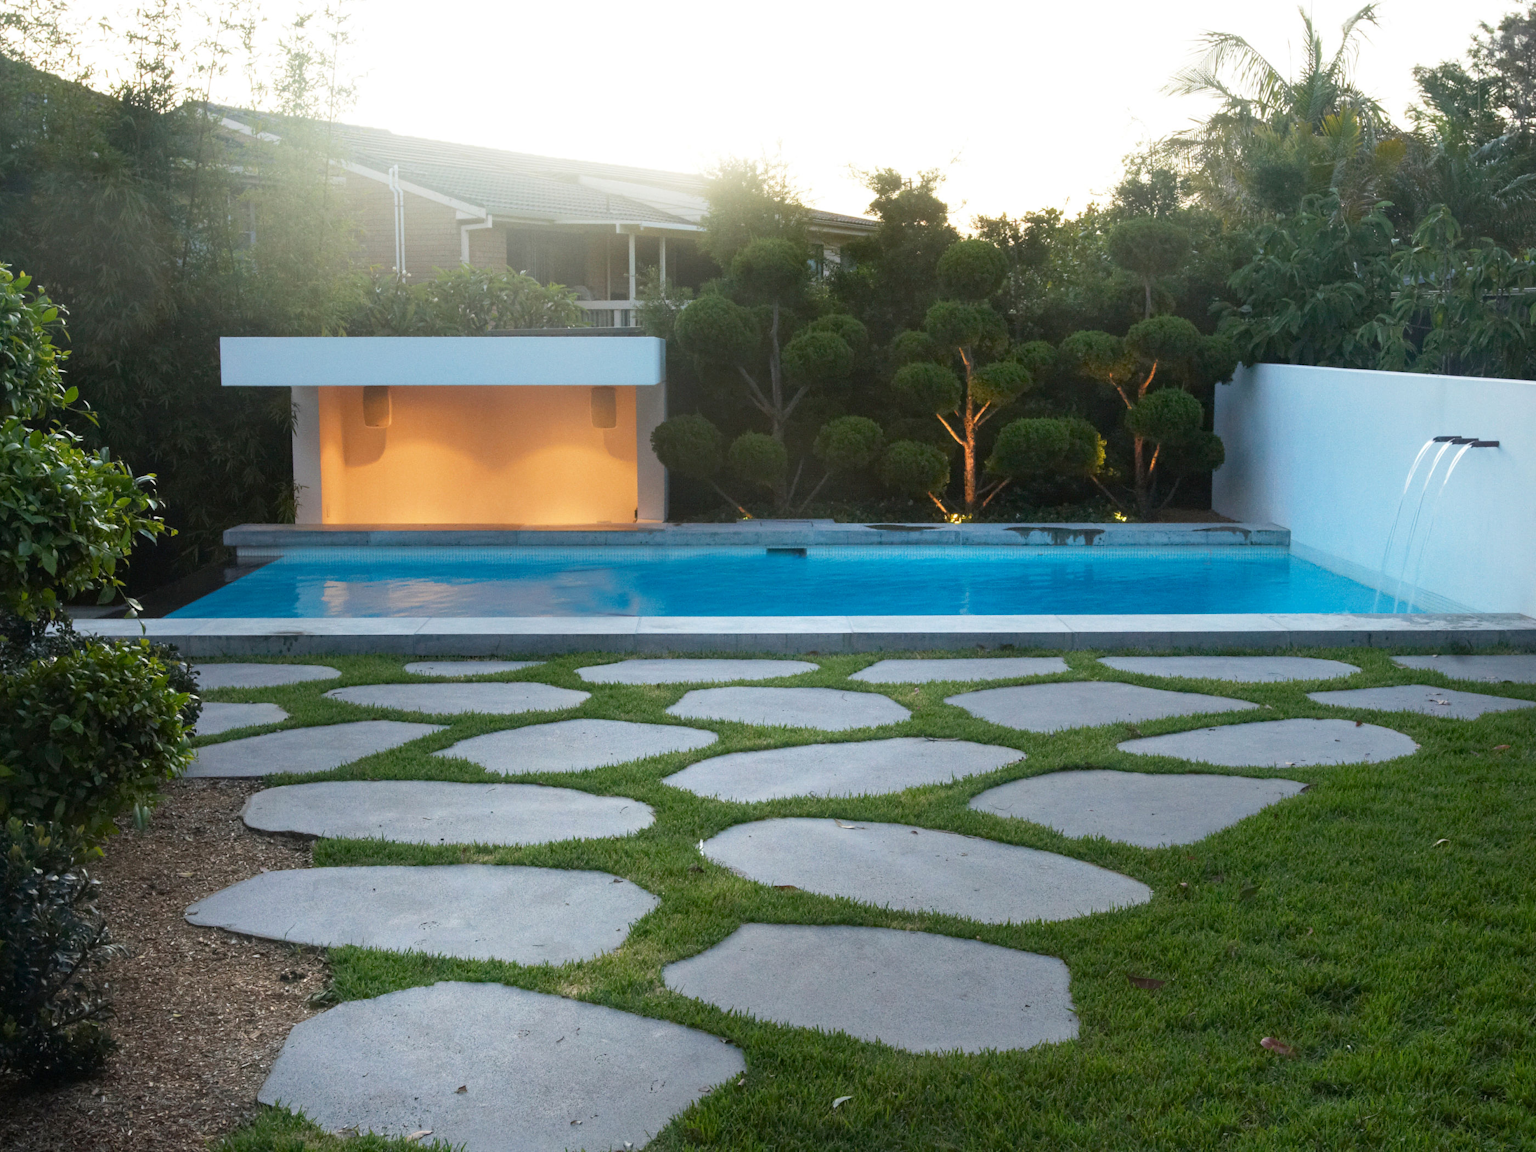 Garden design with bluestone organic steppers and rebated coping units around pool